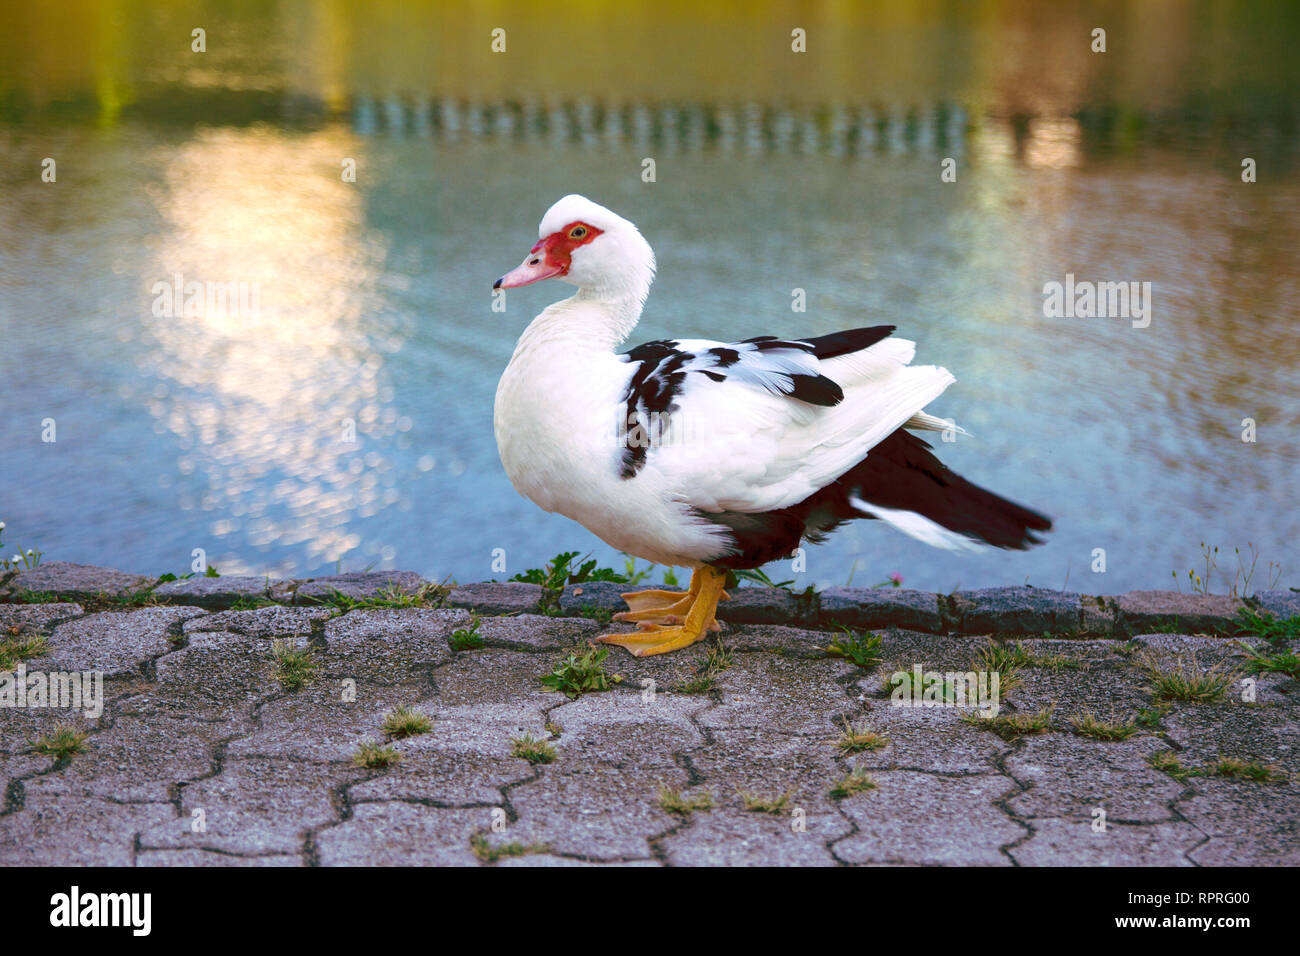 proPortrait of Muscovy Duck standing by the river. White feathers  with black plumage and red face. Duck of ornamental breed. Stock Photo